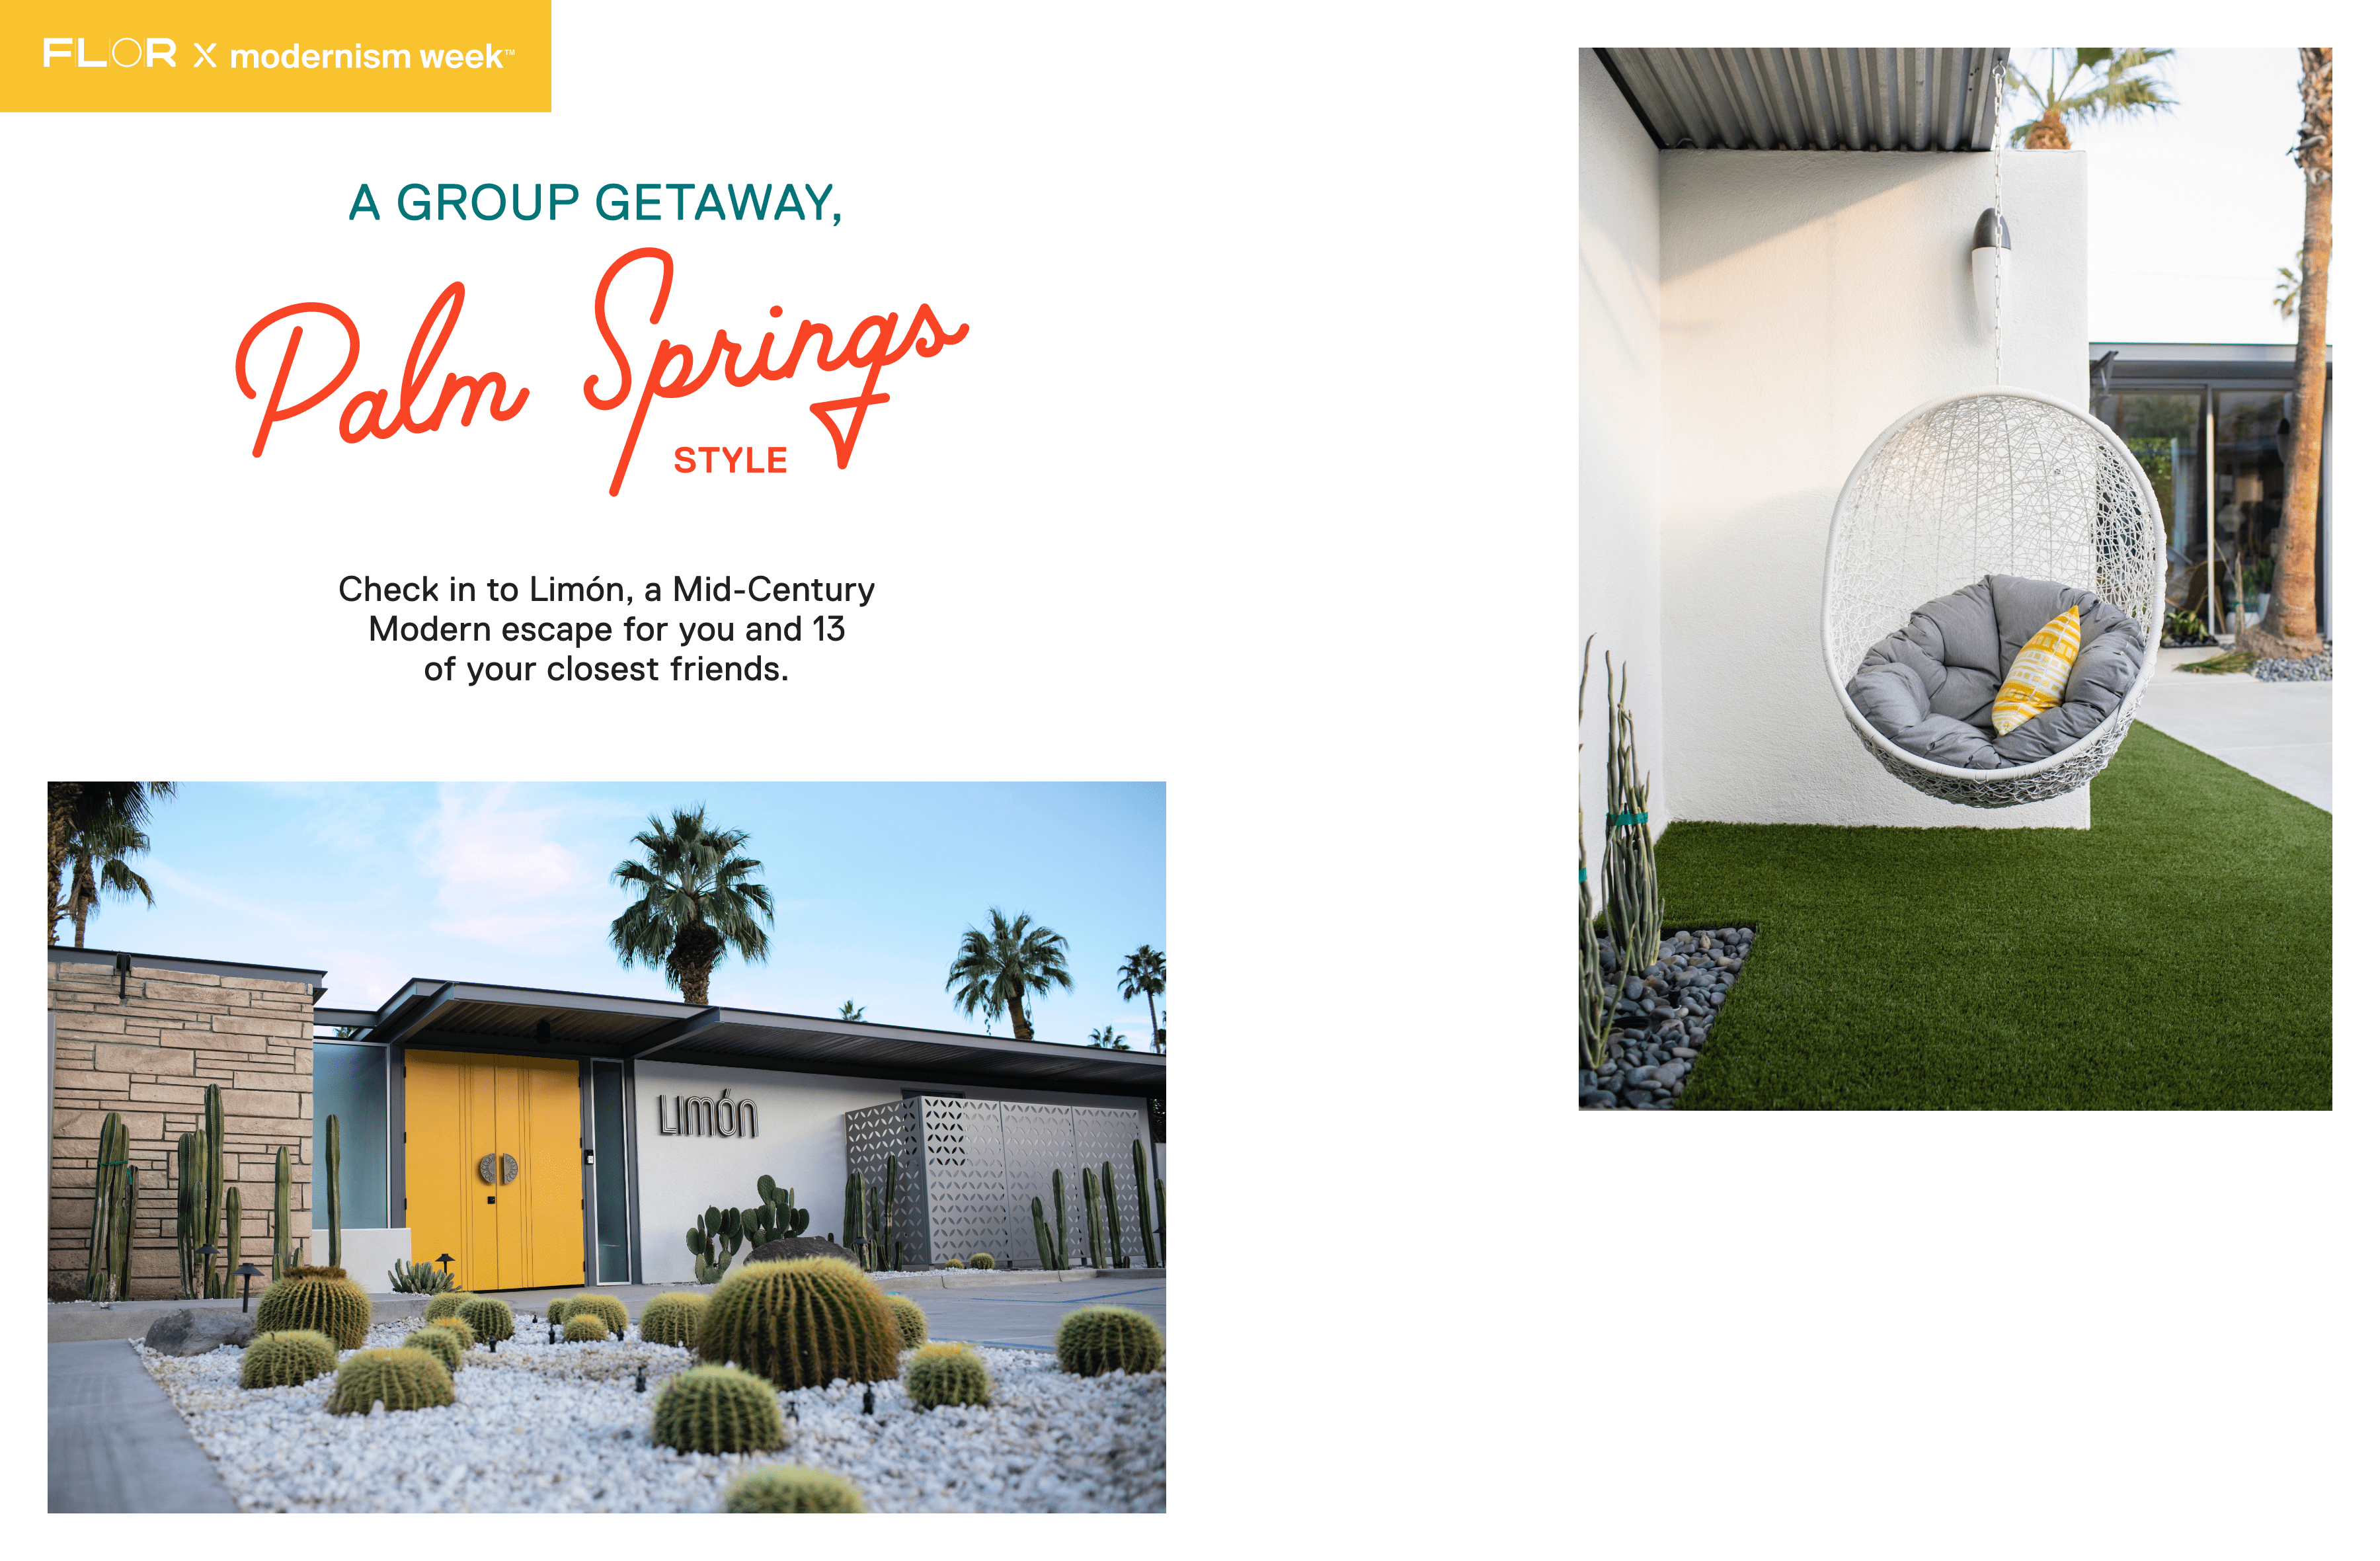 A Group Getaway, Palm Springs Style.
Check in to Limón, a Mid-Century Modern escape for you and 13 of your closest friends.